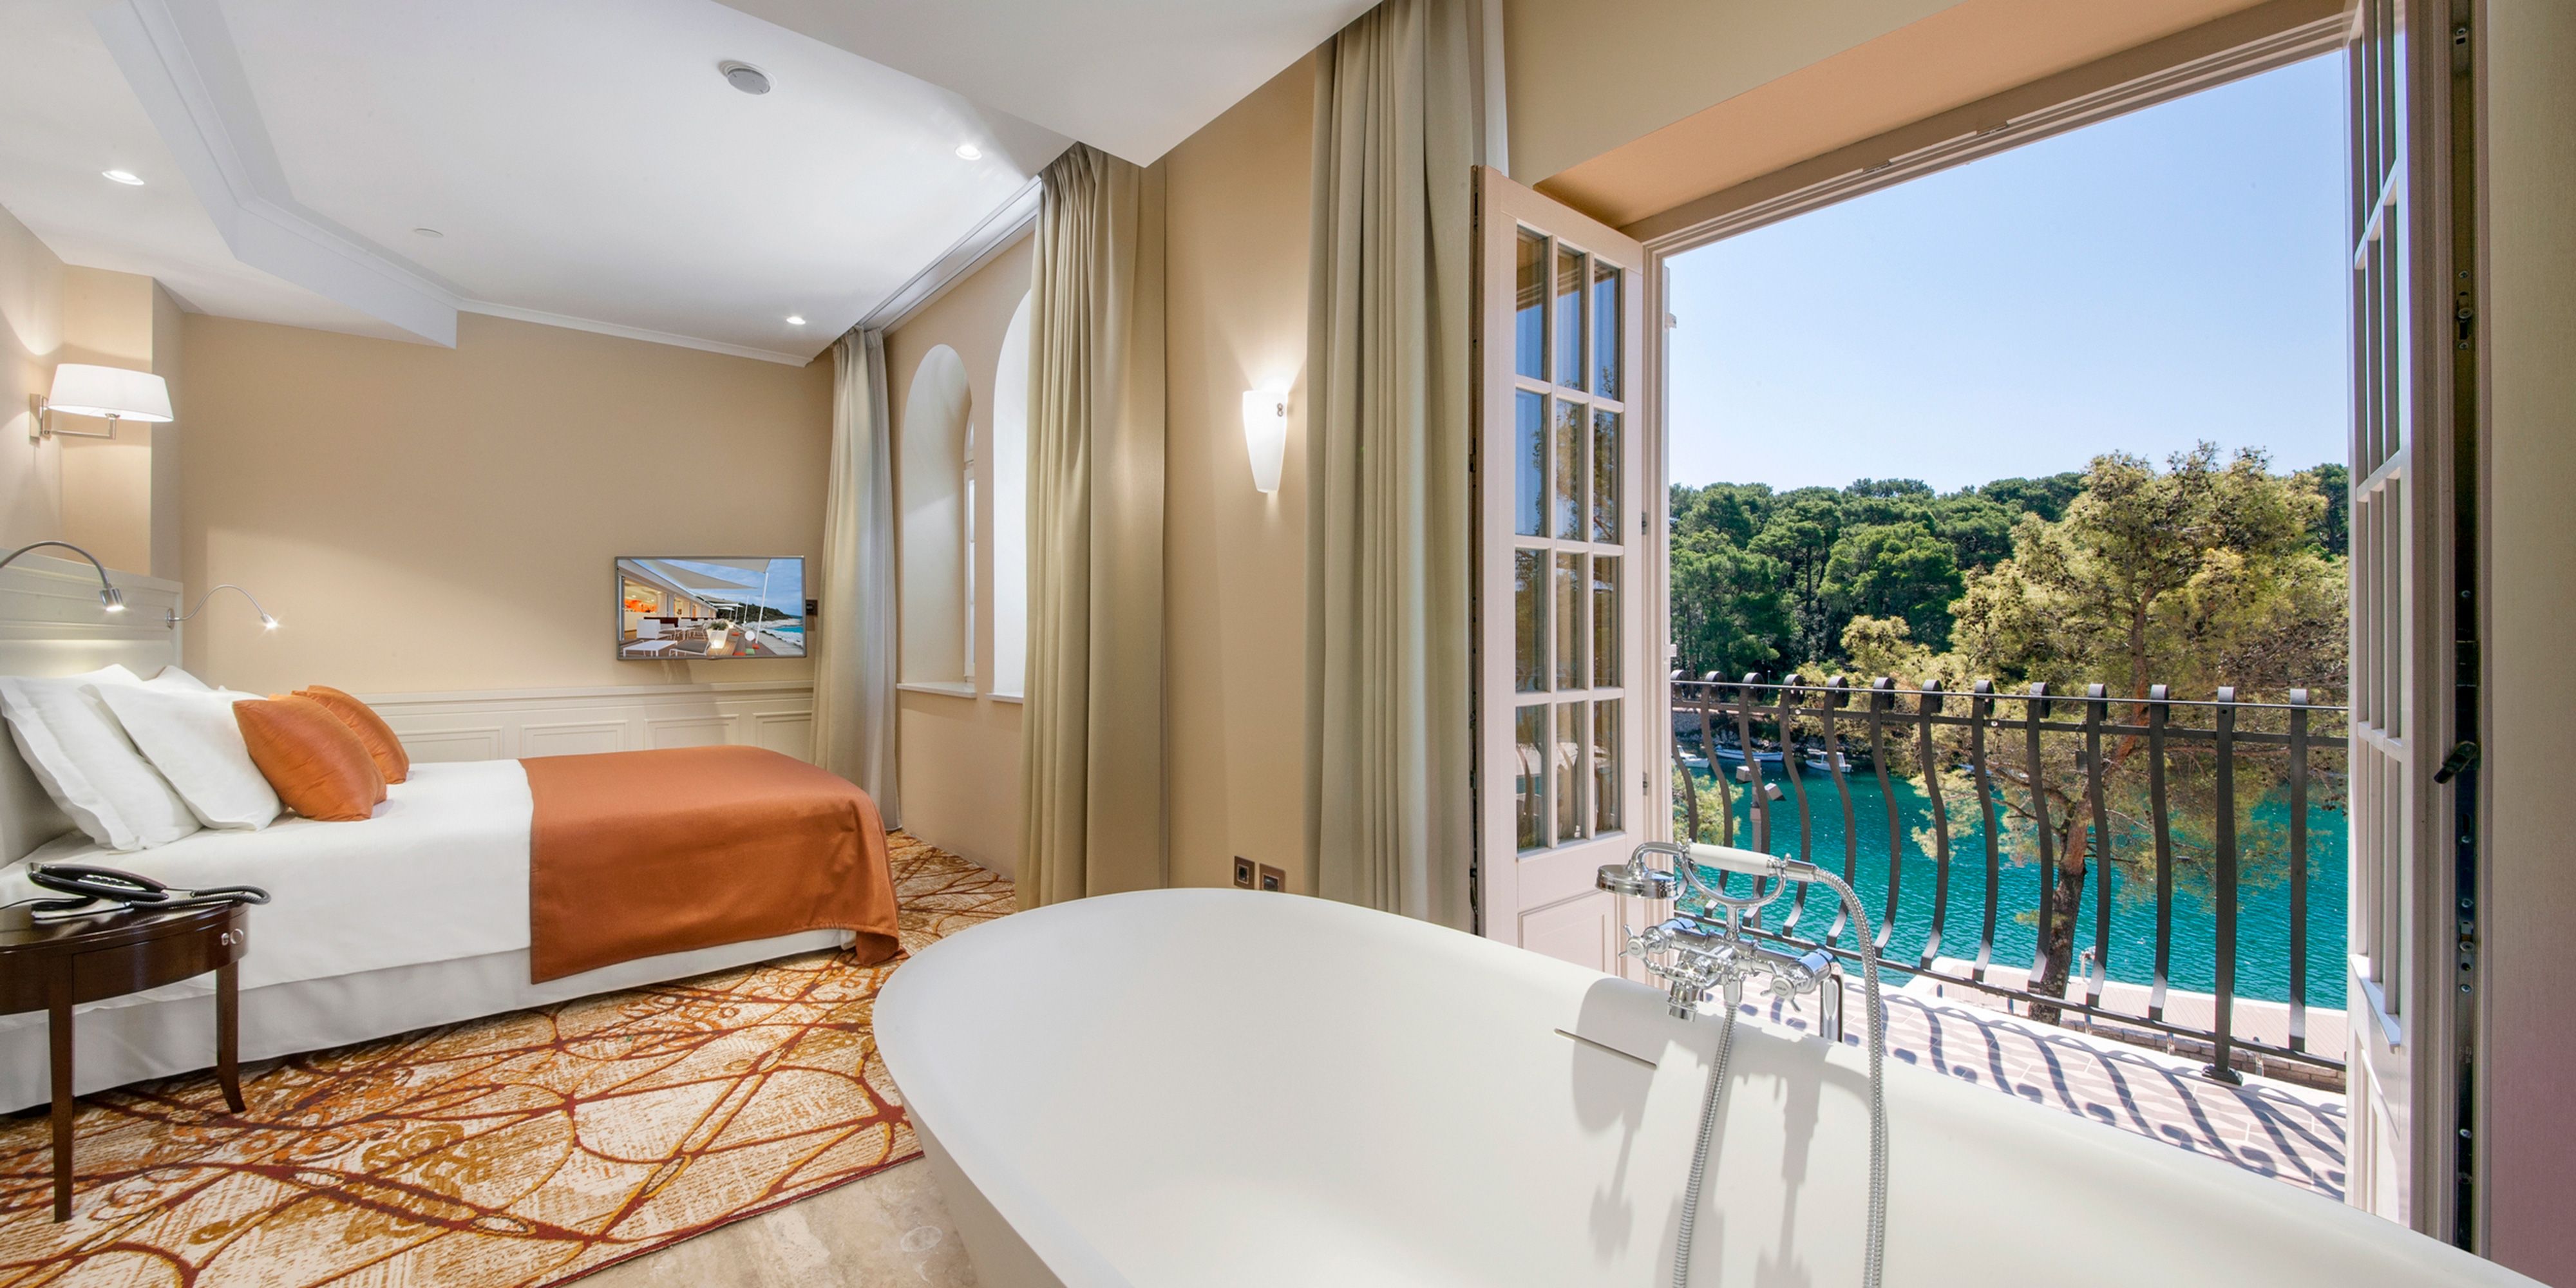 Top 4 Hotels with Gym and Fitness Center in Mali Lošinj